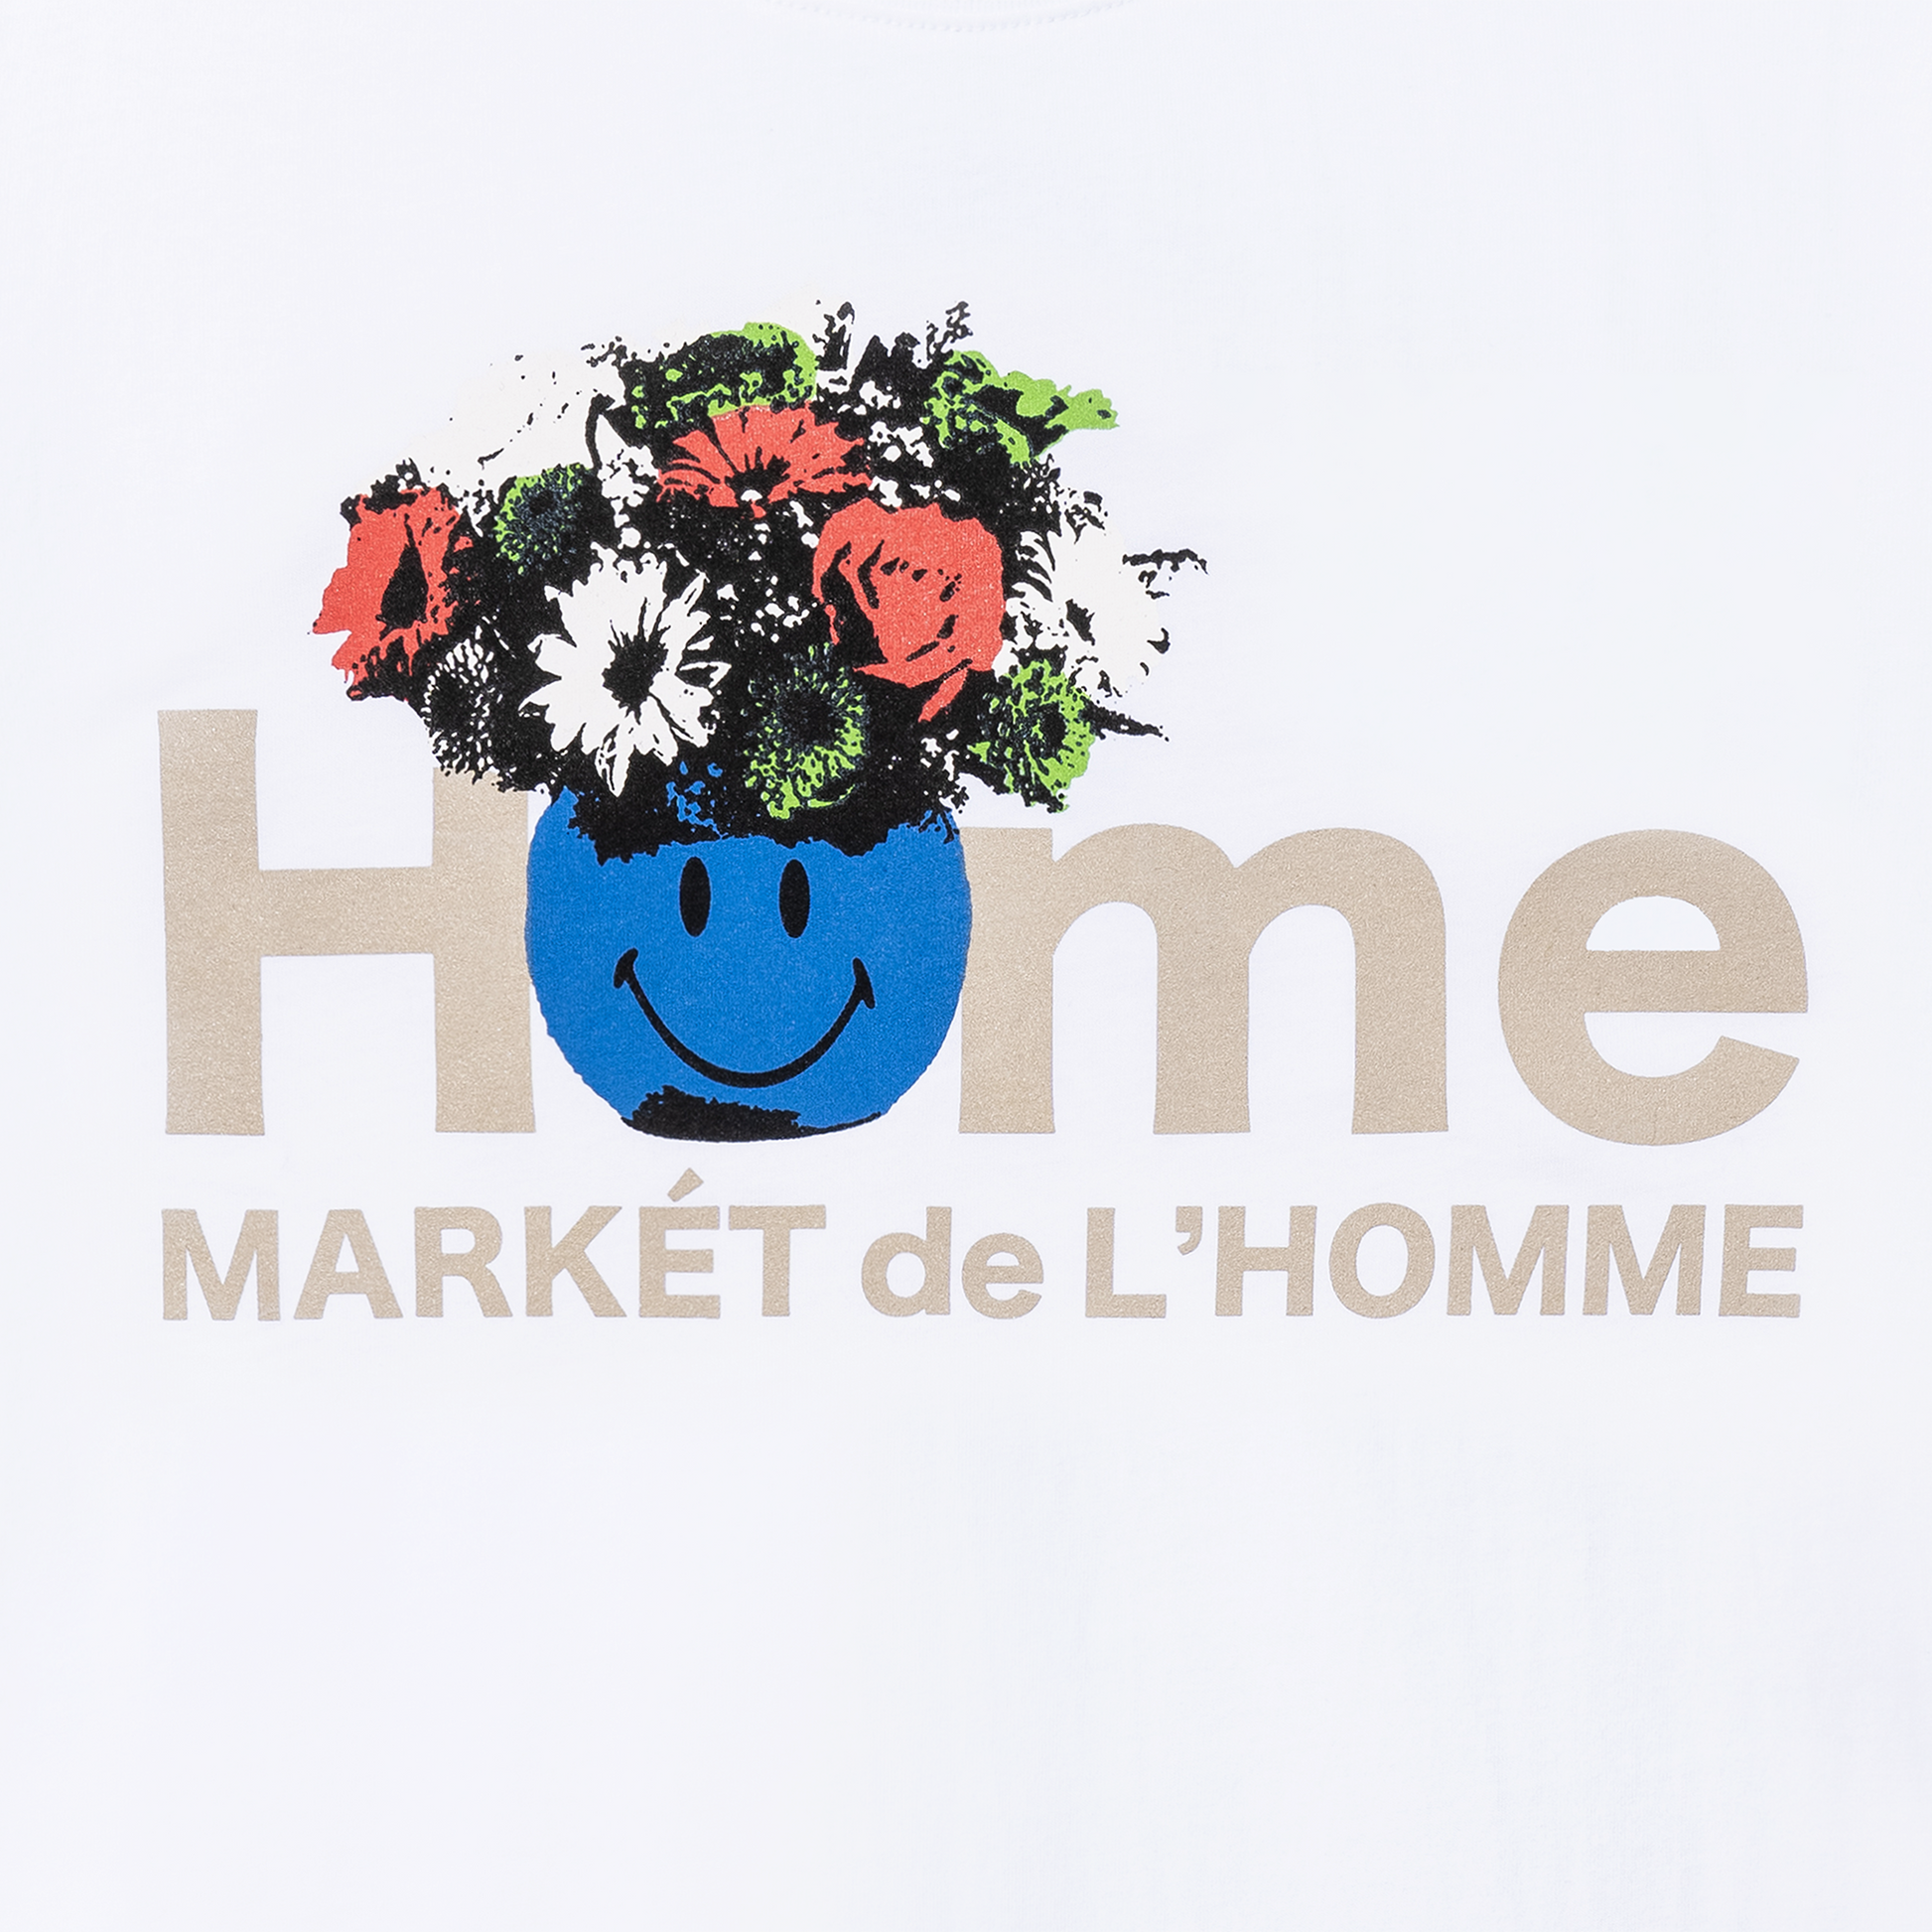 MARKET clothing brand SMILEY MARKET DE L'HOMME T-SHIRT. Find more graphic tees, hats, hoodies and more at MarketStudios.com. Formally Chinatown Market.